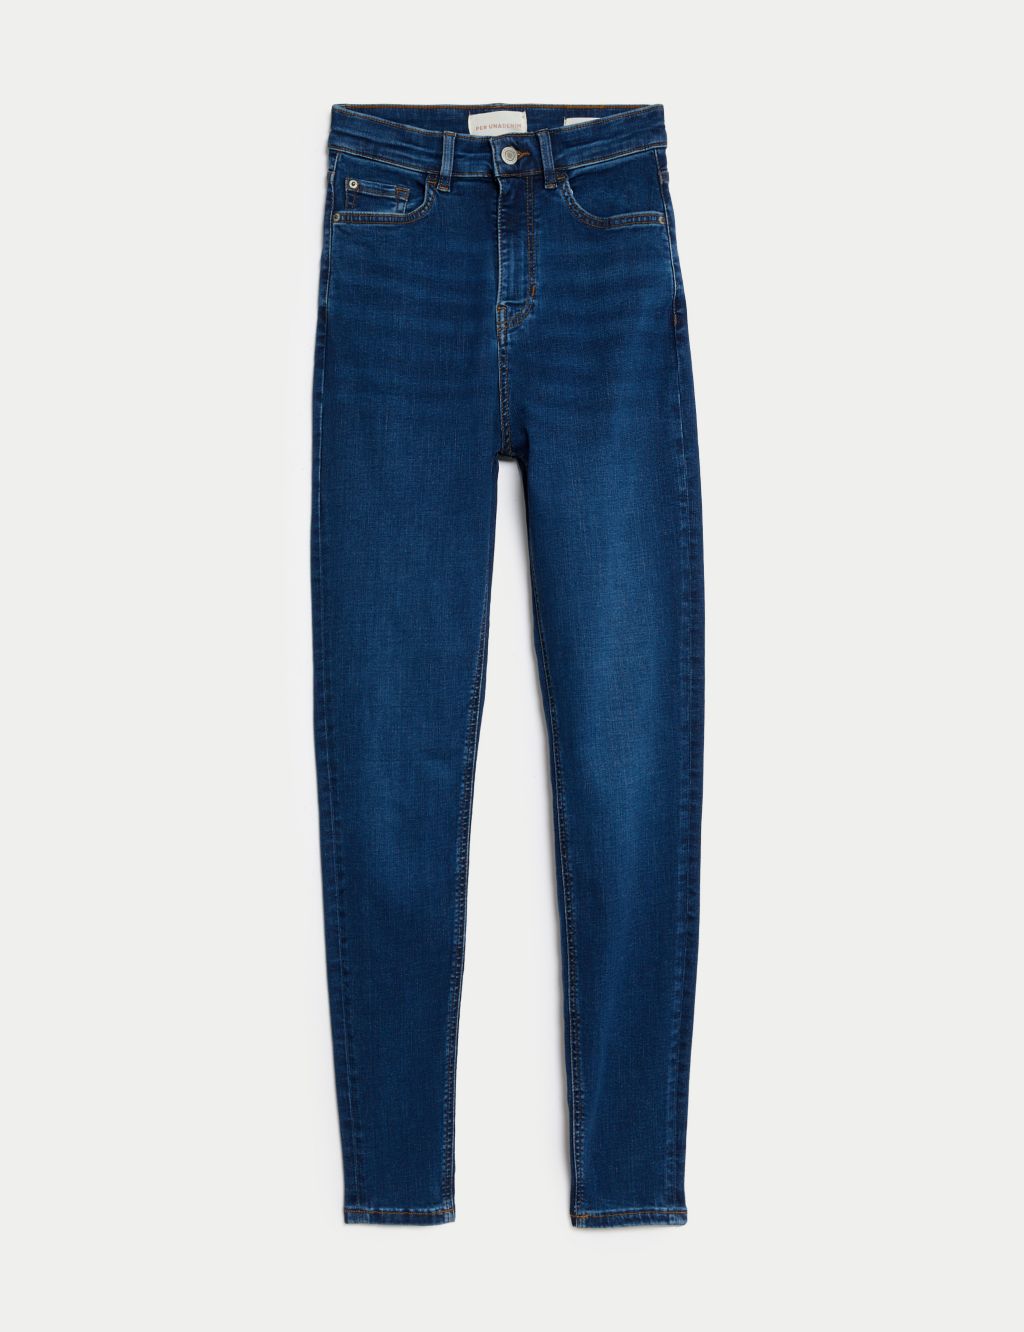 Lyocell Rich High Waisted Skinny Jeans image 2